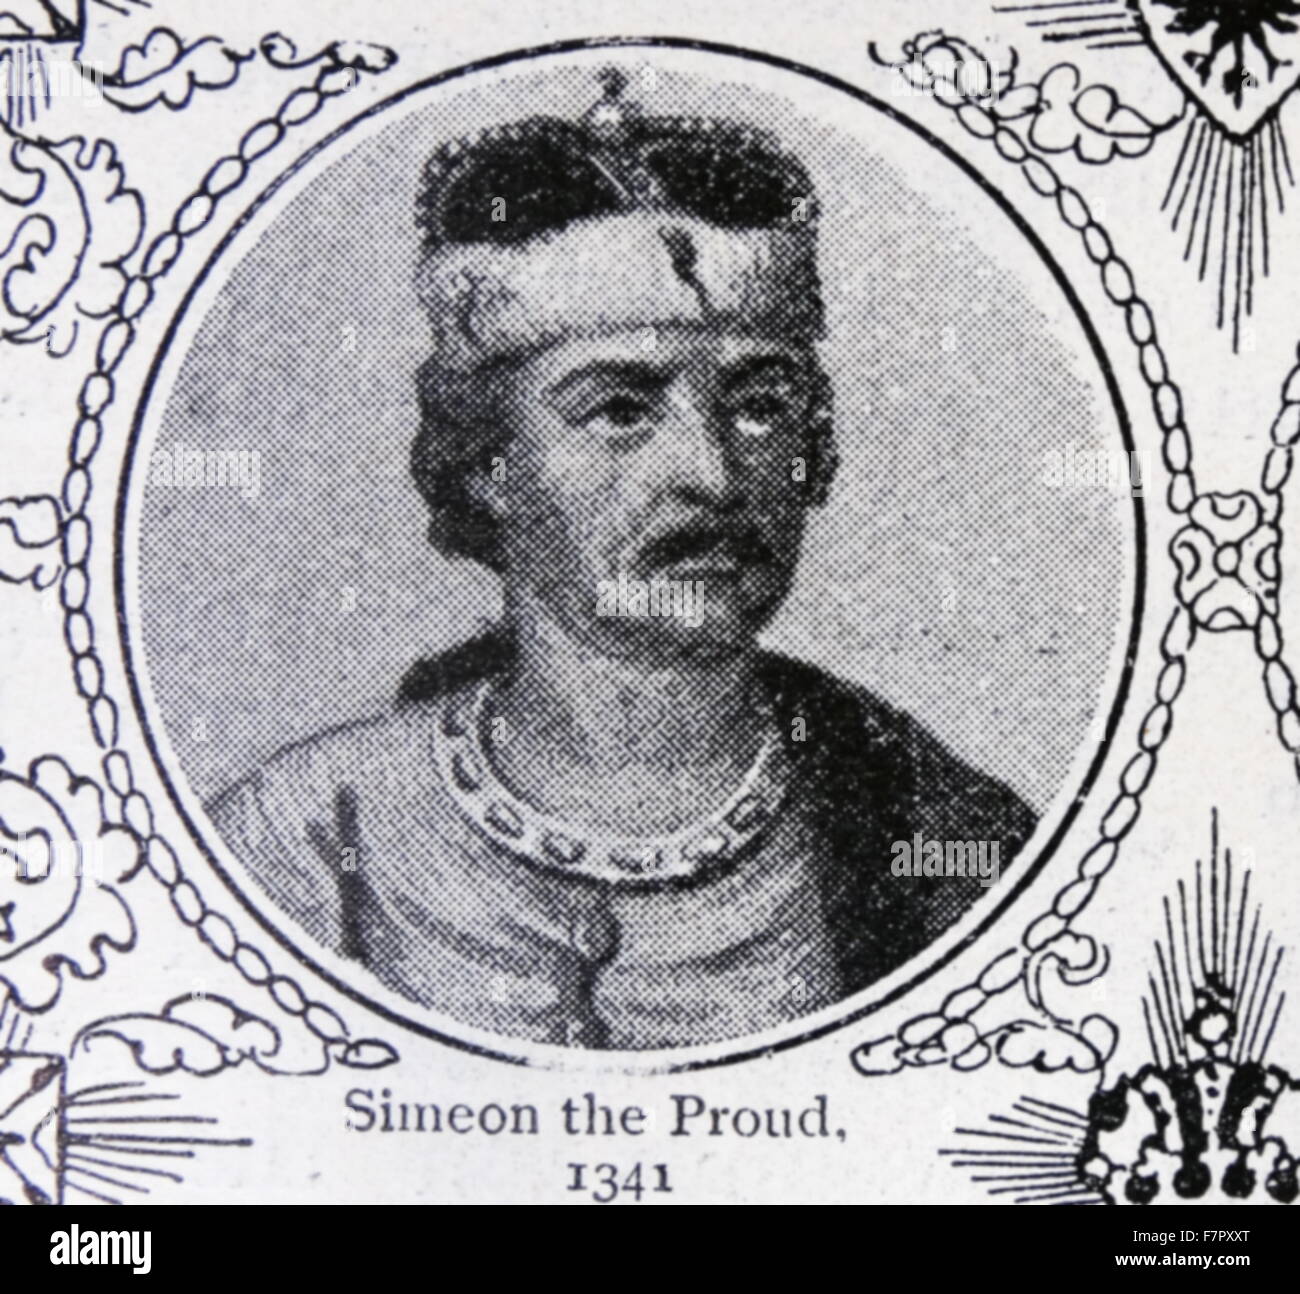 Simeon Ivanovich Gordiy (the Proud) (1316 – 1353) Prince of Moscow and Grand Prince of Vladimir. Simeon continued his father's policies aimed to increase the power and prestige of his state. Simeon's rule was marked by regular military and political standoffs against Novgorod Republic and Lithuania. His relationships with neighbouring Russian principalities remained peaceful if not passive: Simeon stayed aside from conflicts between subordinate princes. Stock Photo